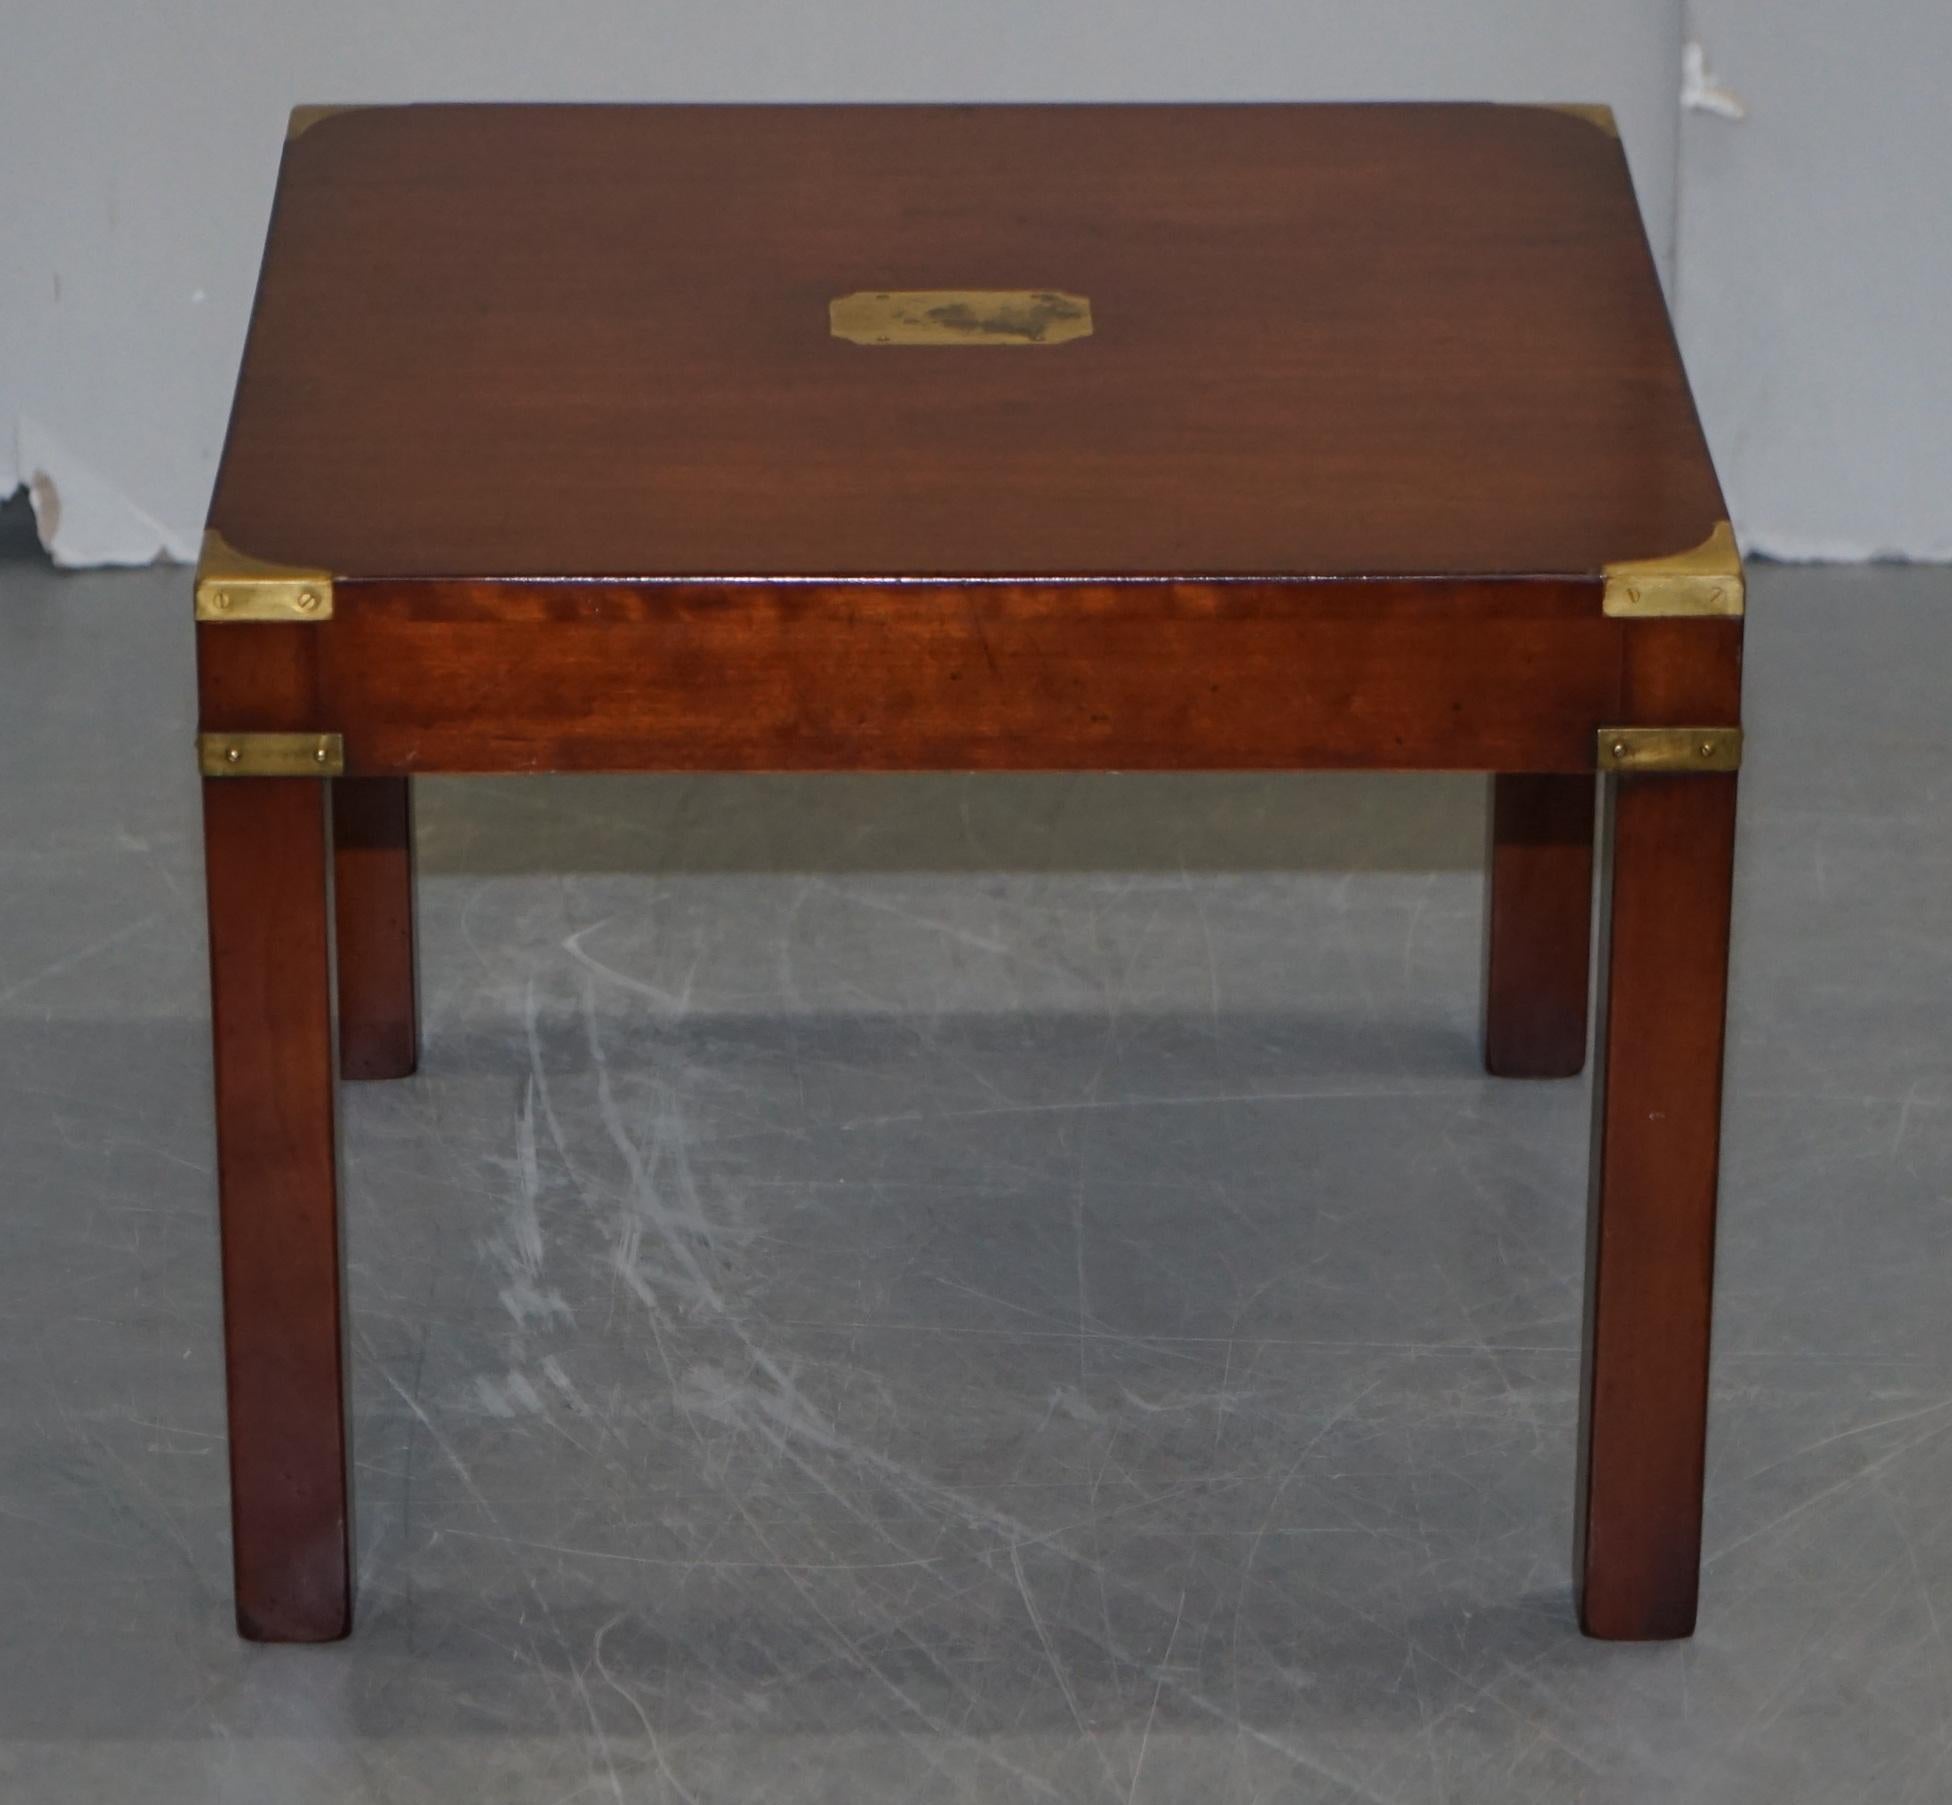 We are delighted to offer for sale this stunning Kennedy furniture Harrods London Military Campaign side table

A good looking and well made piece, absolutely iconic and highly collectable

This has the original finish and is in good order